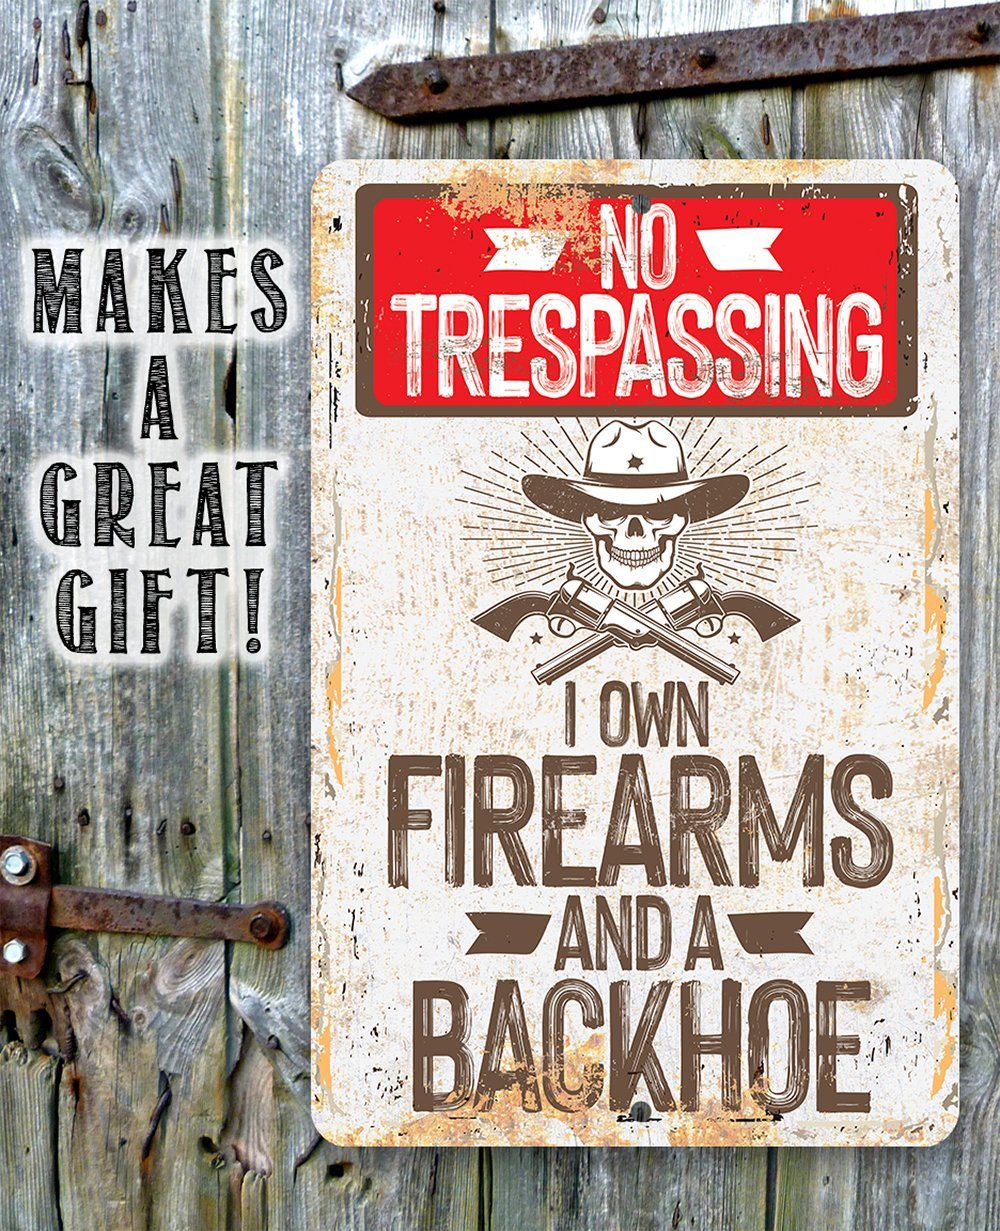 I Own Firearms and a Backhoe  - Metal Sign | Lone Star Art.